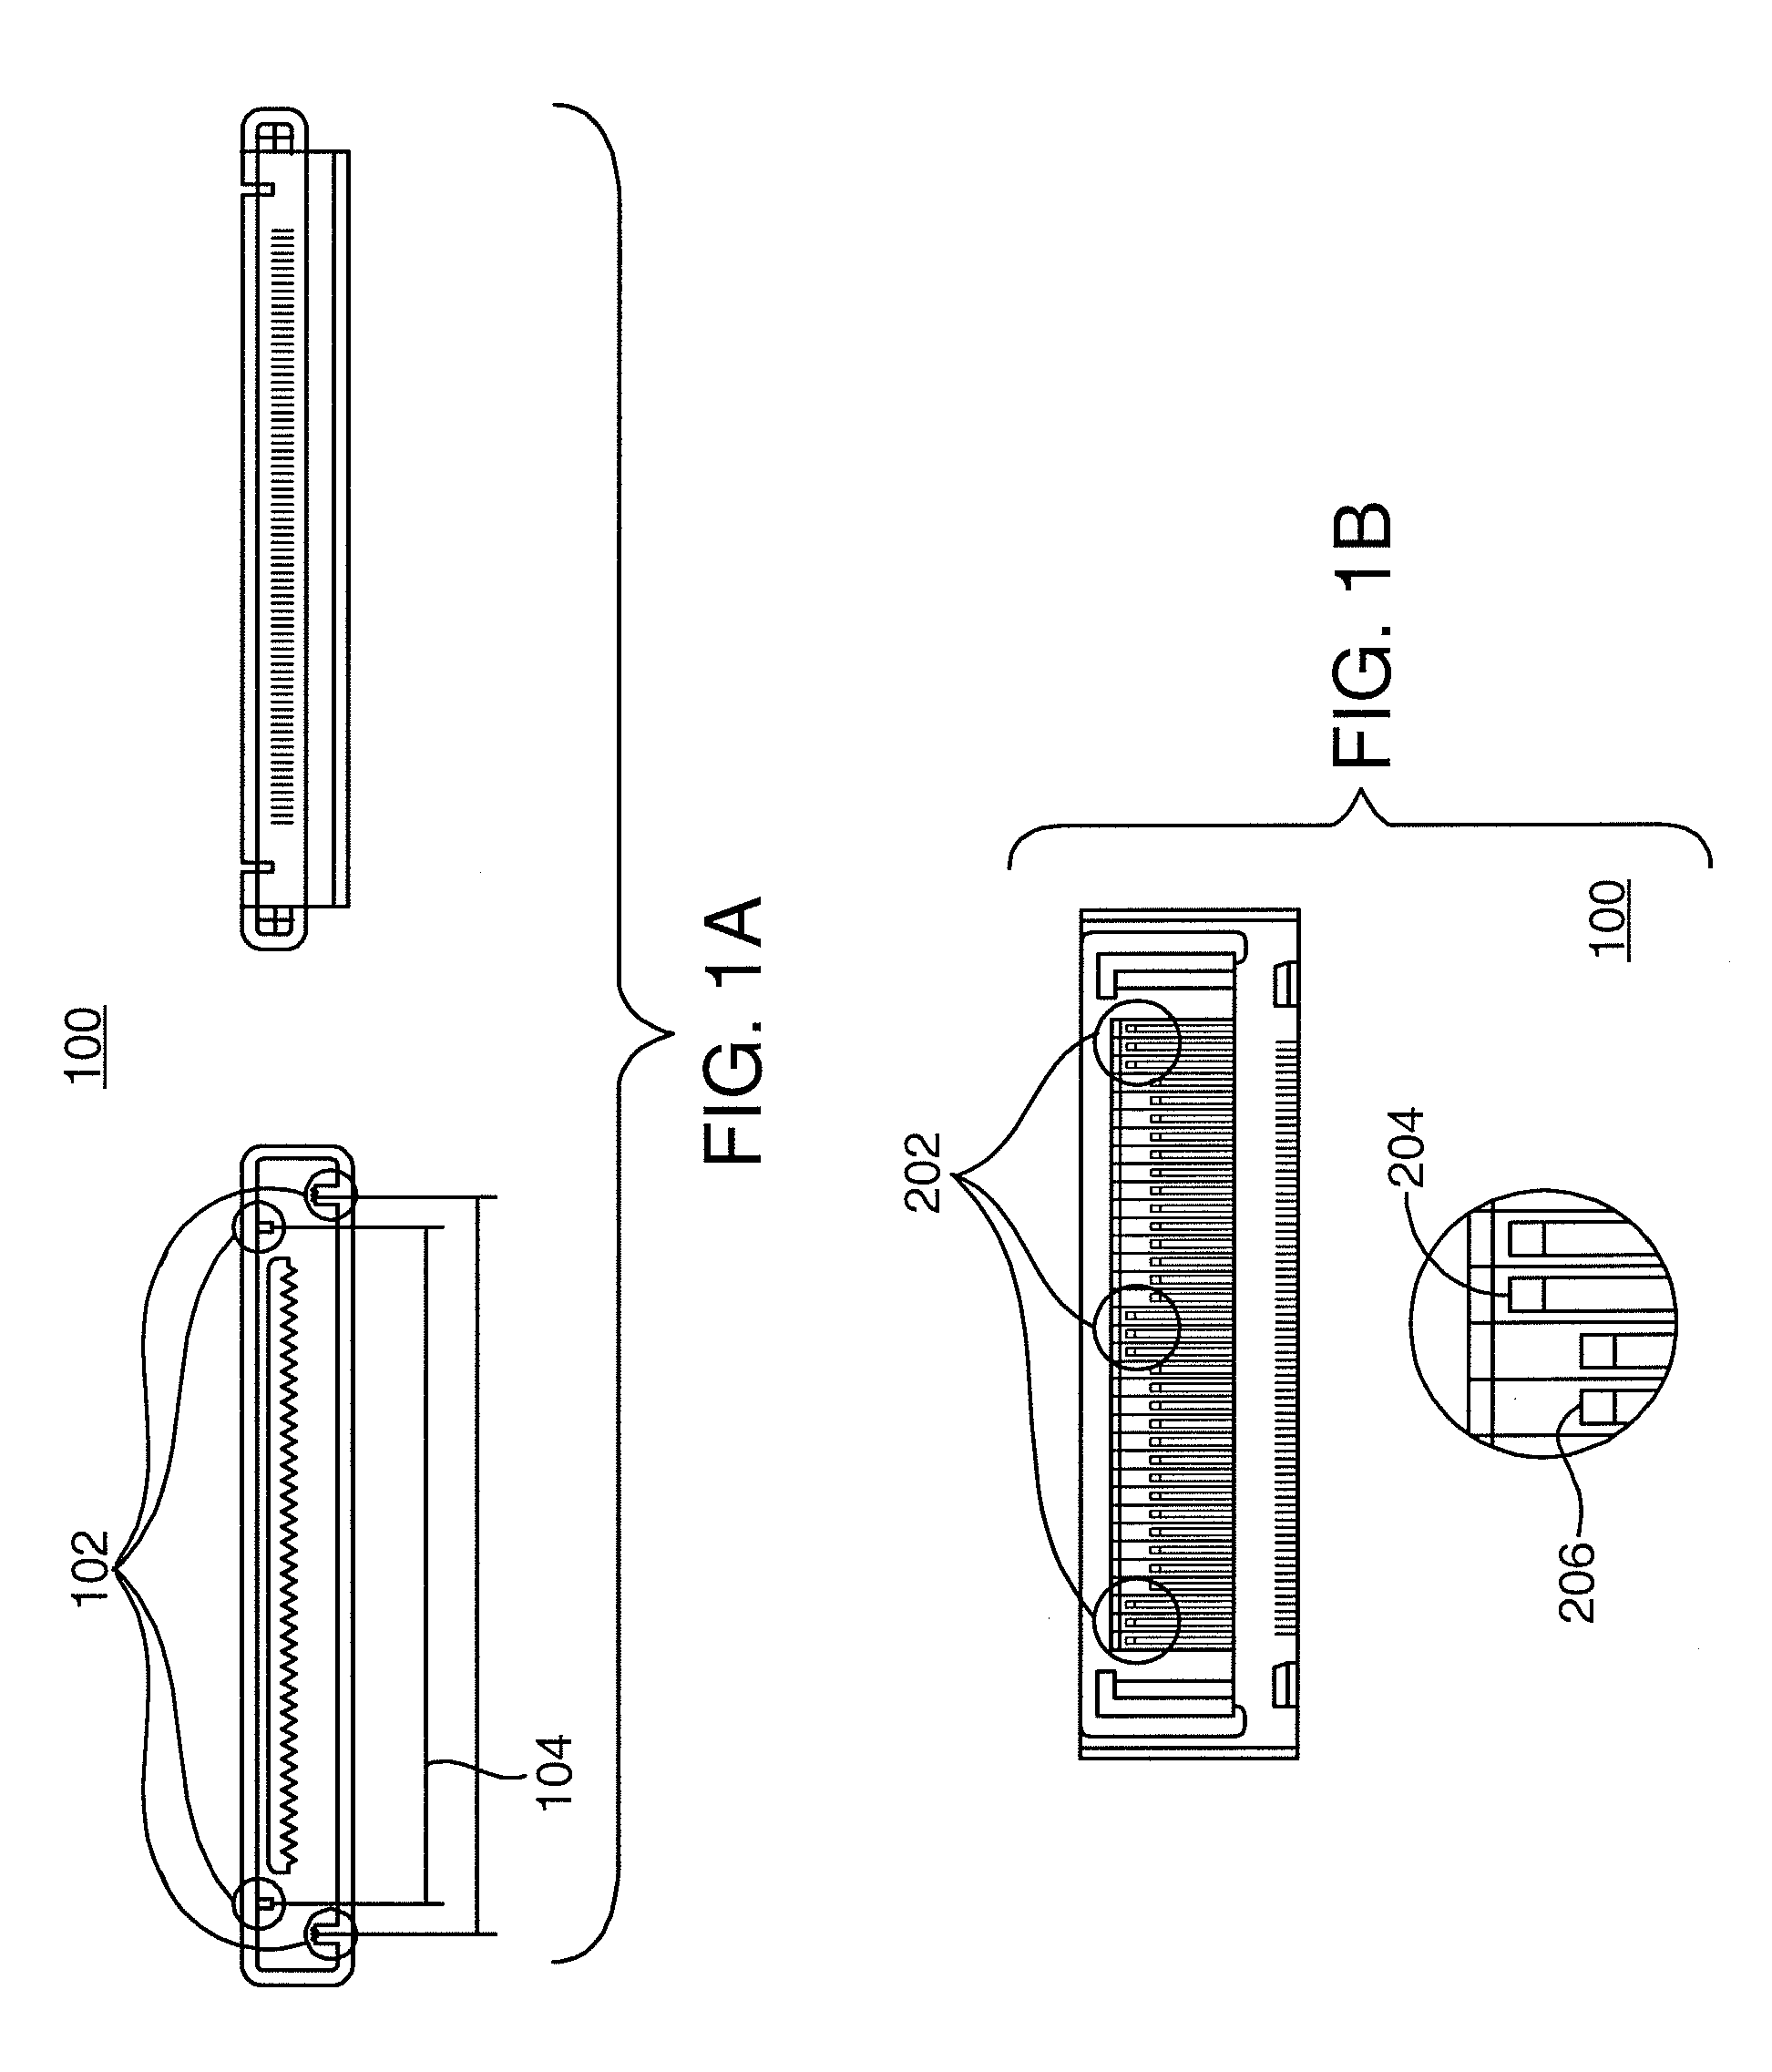 Communication between an accessory and a media player using a protocol with multiple lingoes